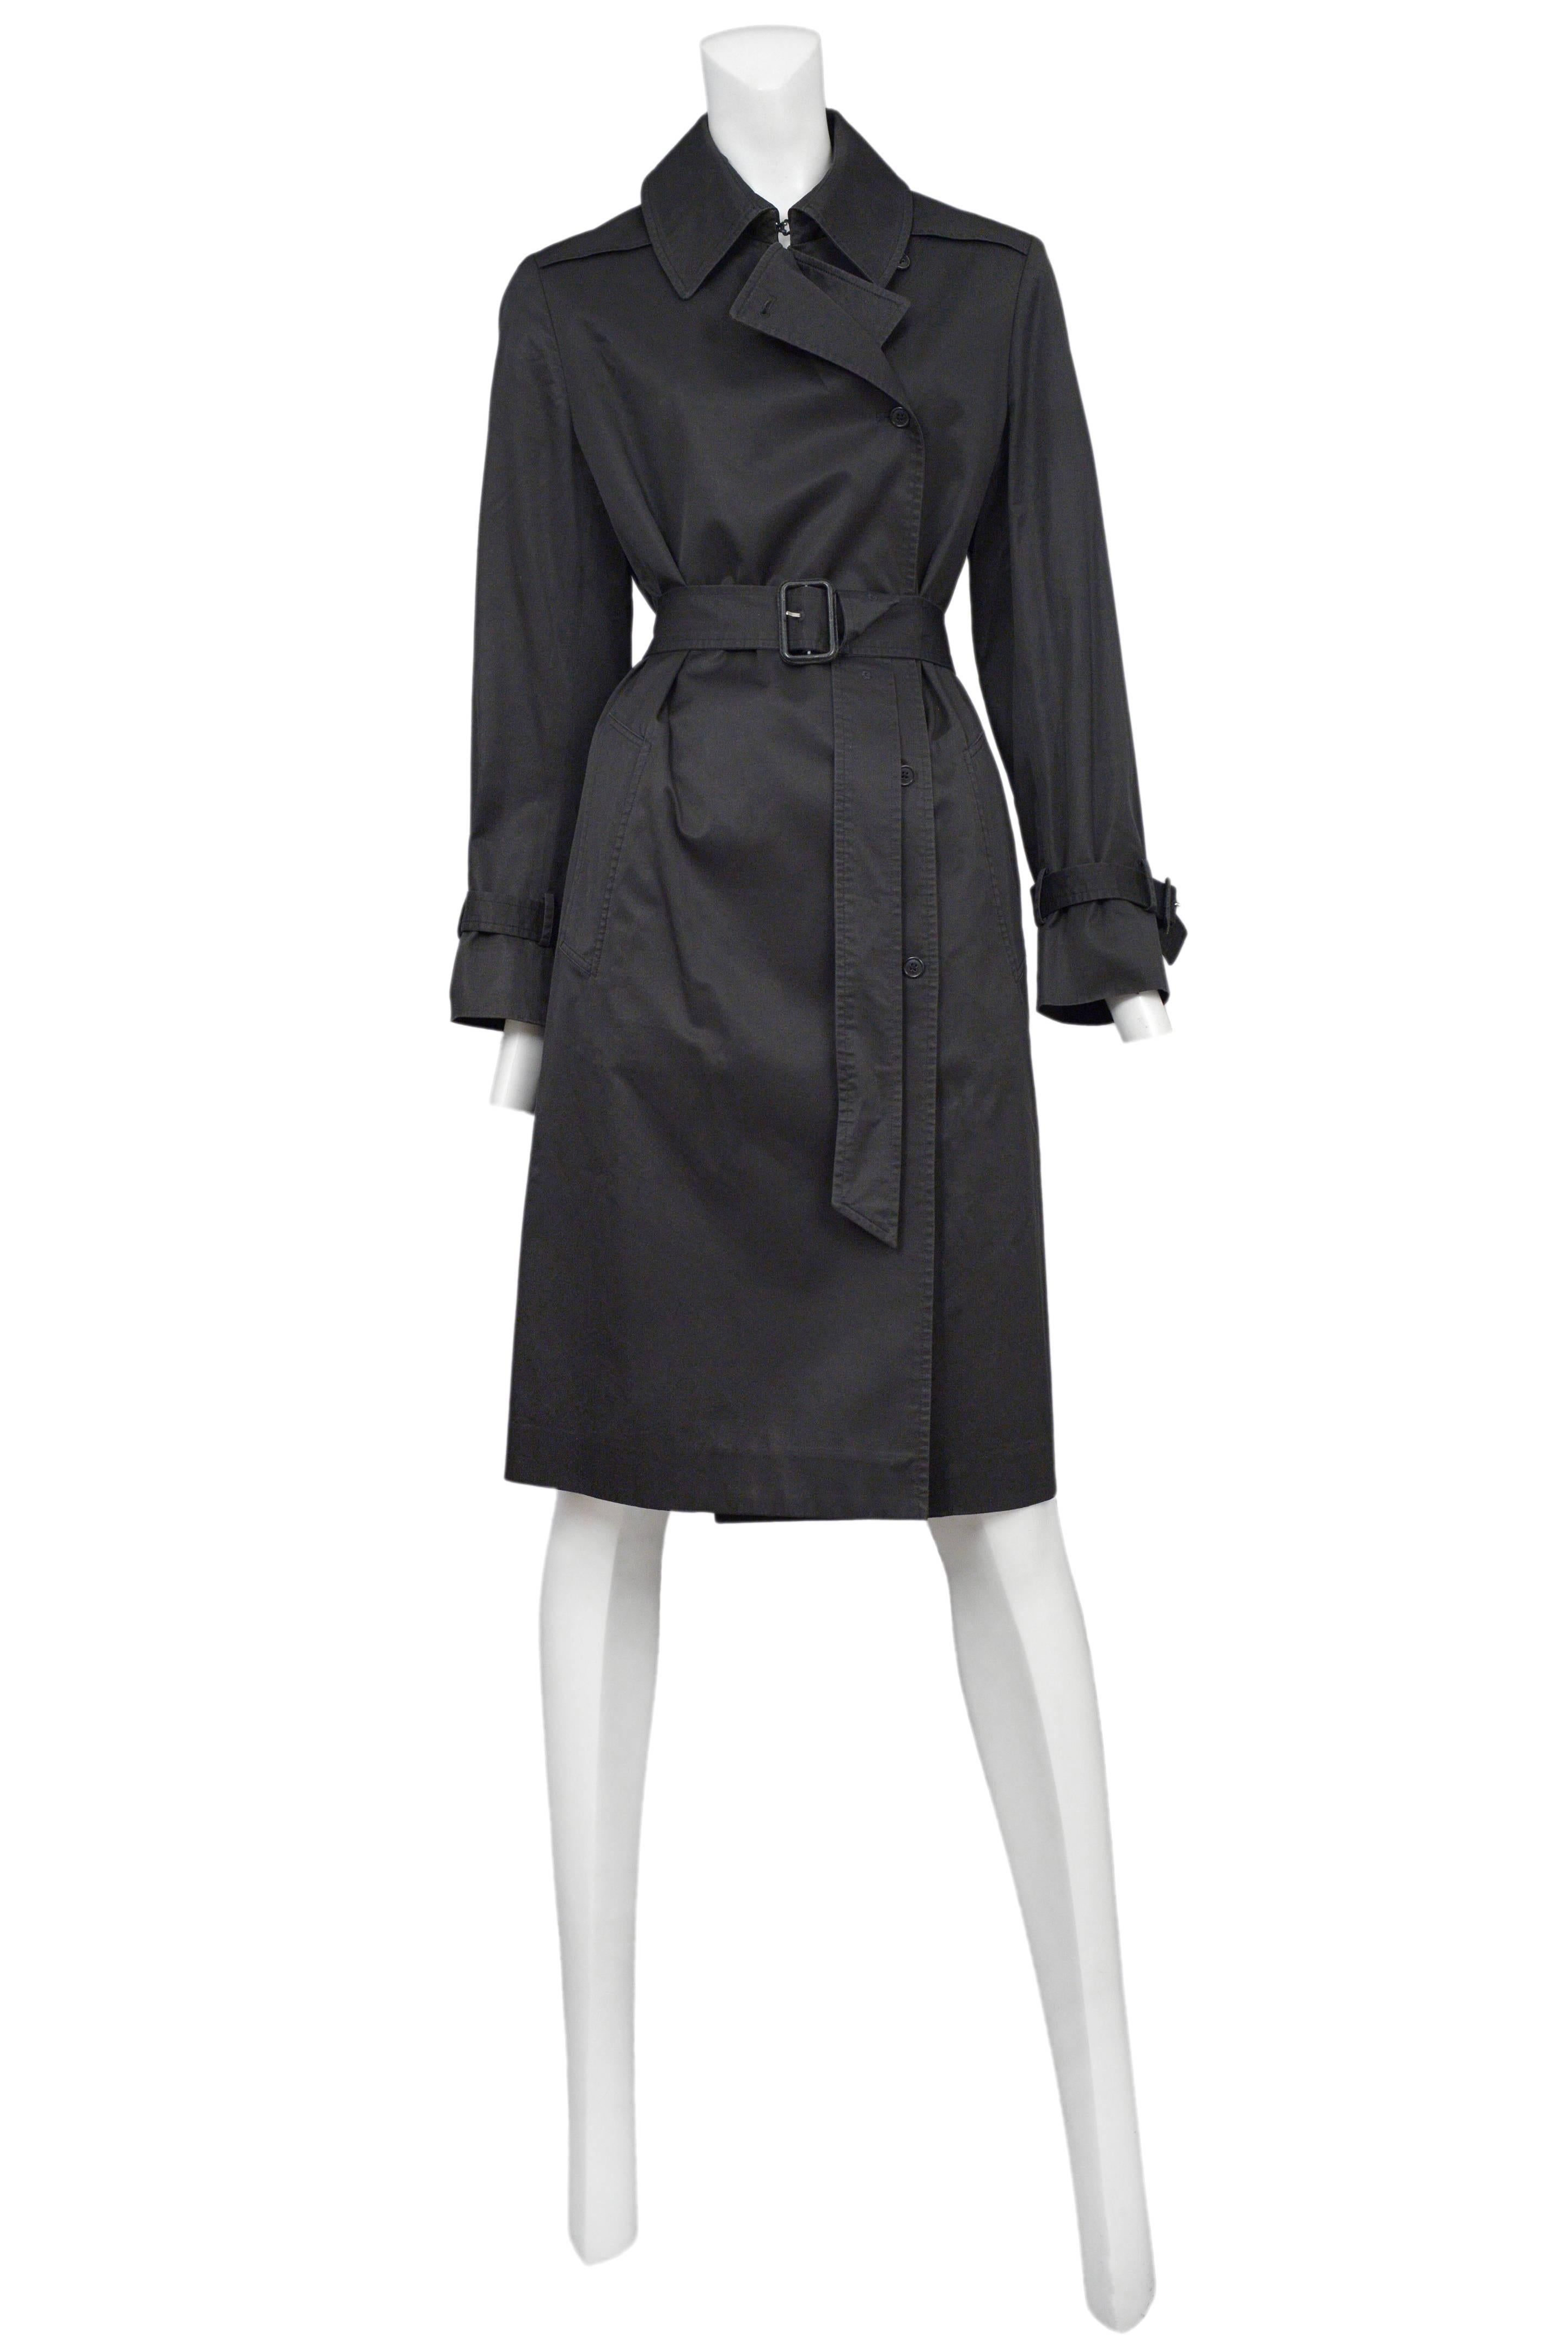 Vintage Maison Martin Margiela black trench coat featuring belted cuffs, side pockets and a matching buckled waist belt.
Please inquire for additional images.